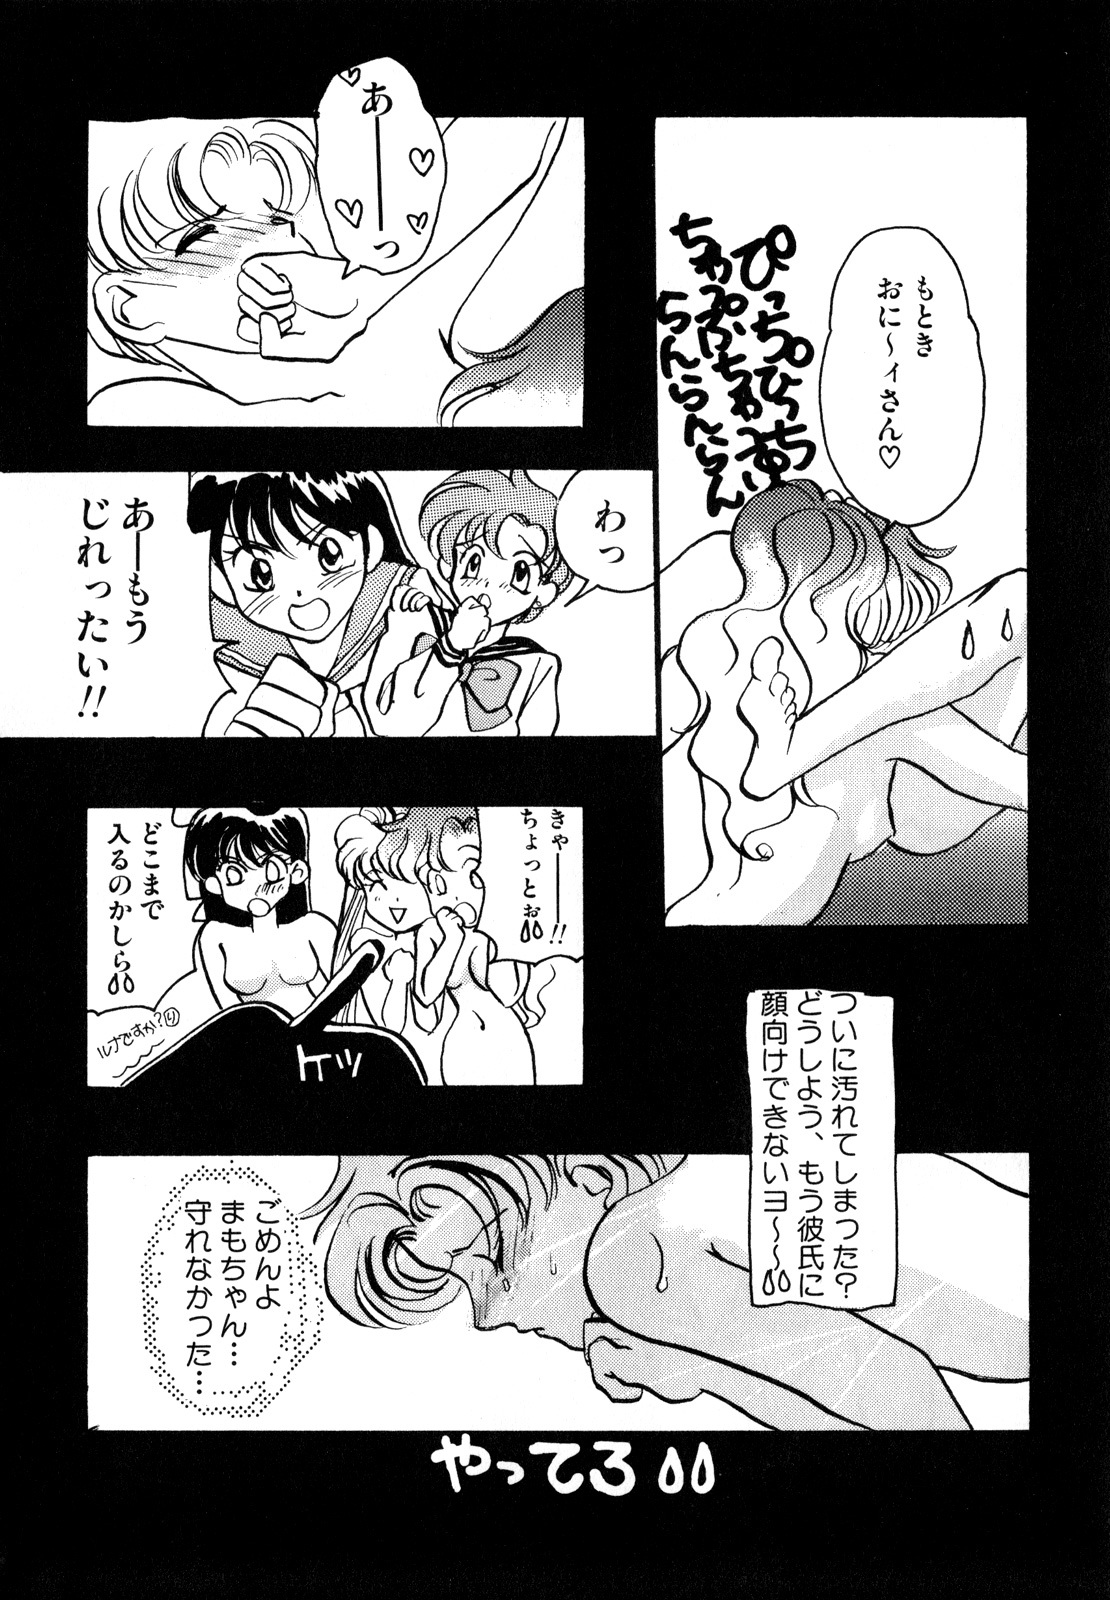 [Anthology] Lunatic Party 2 (Sailor Moon) page 23 full